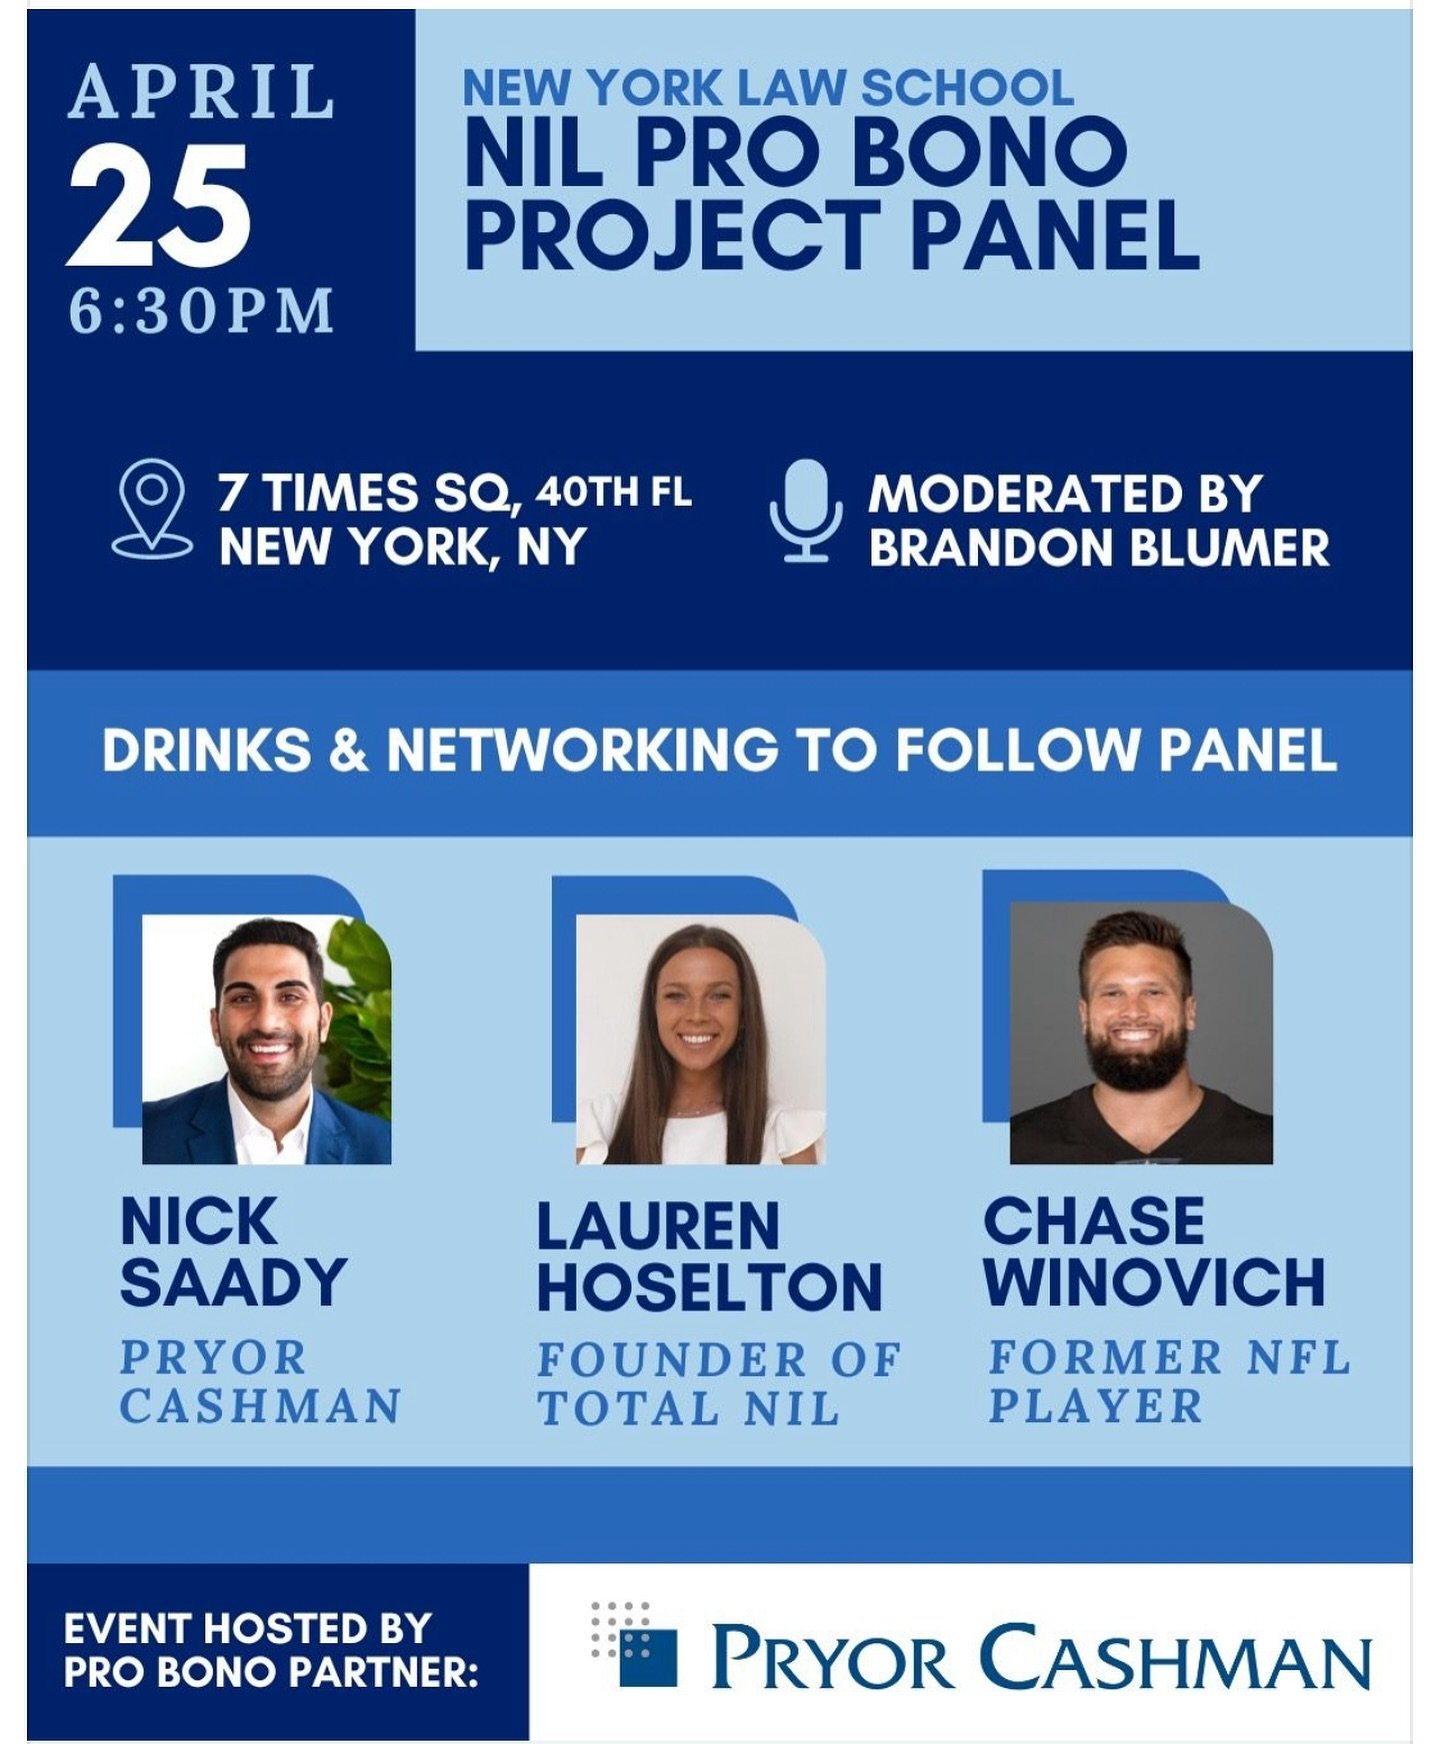 I am looking forward to sitting on the @nylawschool panel in New York City in a few weeks. 

This panel will discuss the latest developments in the collegiate and professional athlete name, image, and likeness (NIL) space while dissecting college and